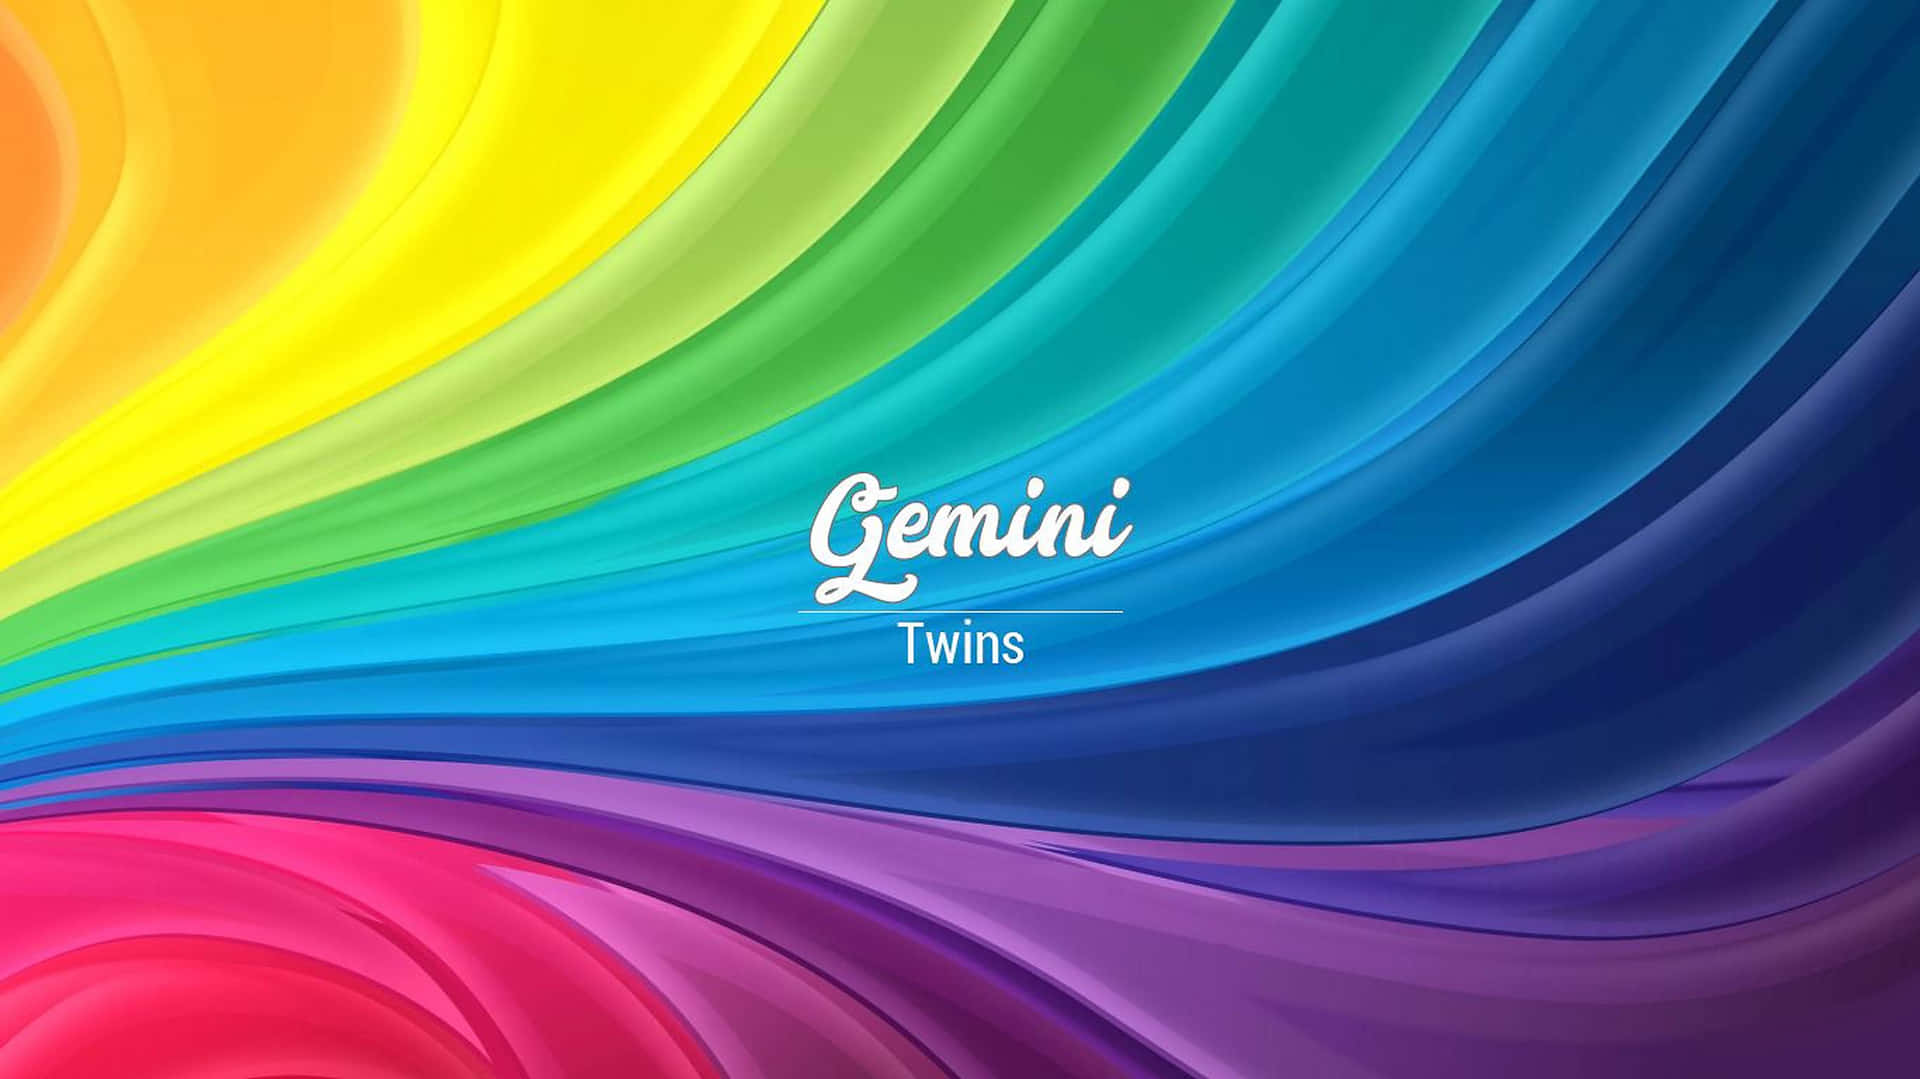 A Colorful Background With The Word Genius Twins